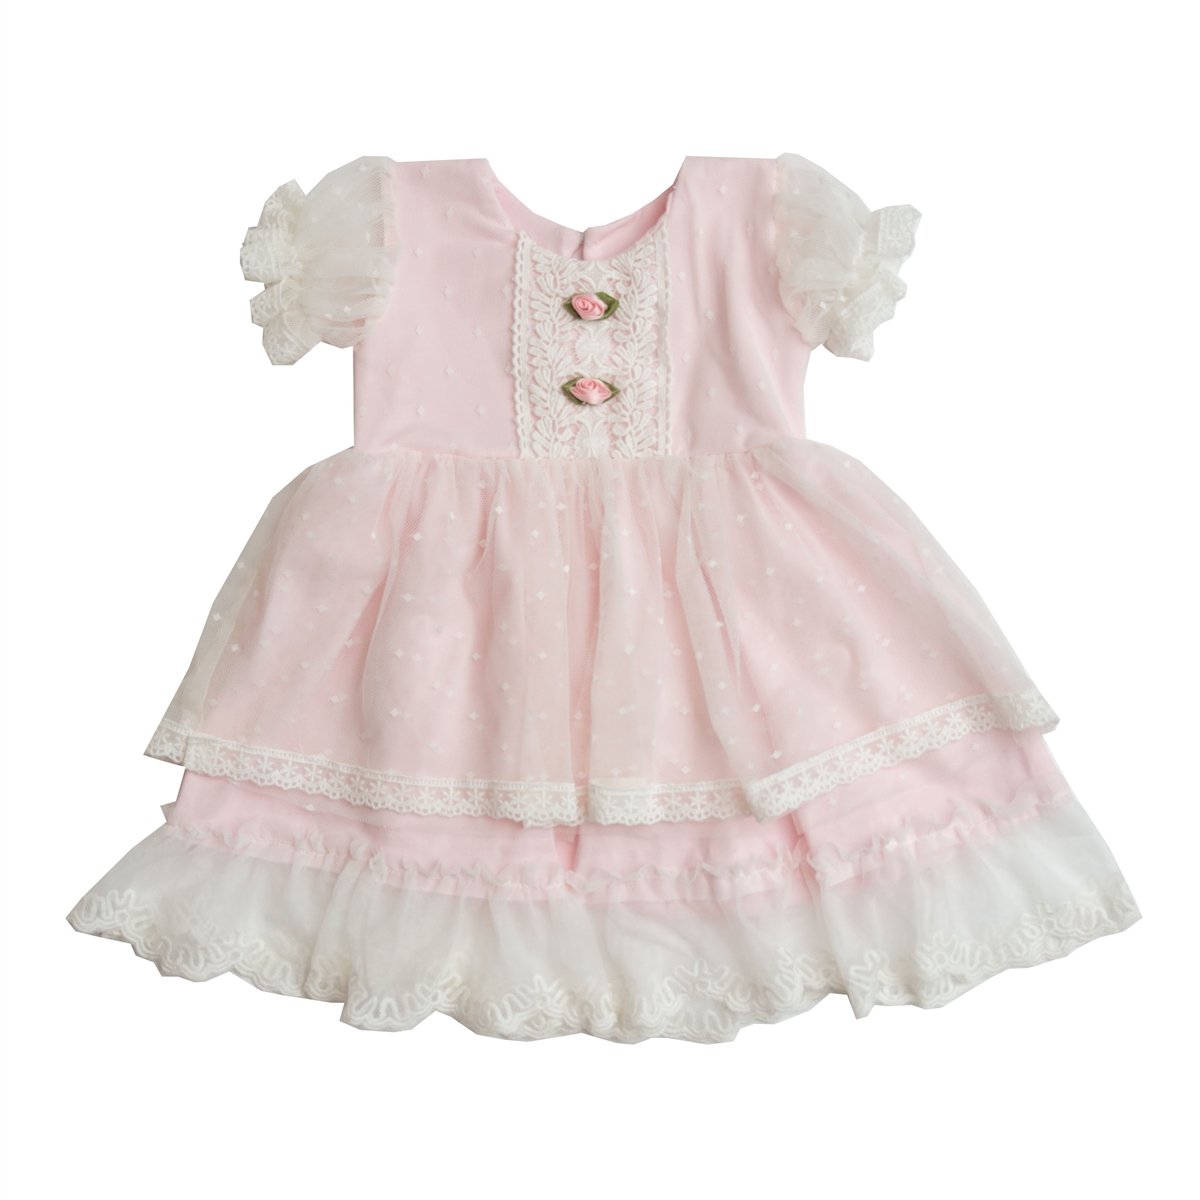 Cute Baby Clothes for Infant and Newborn